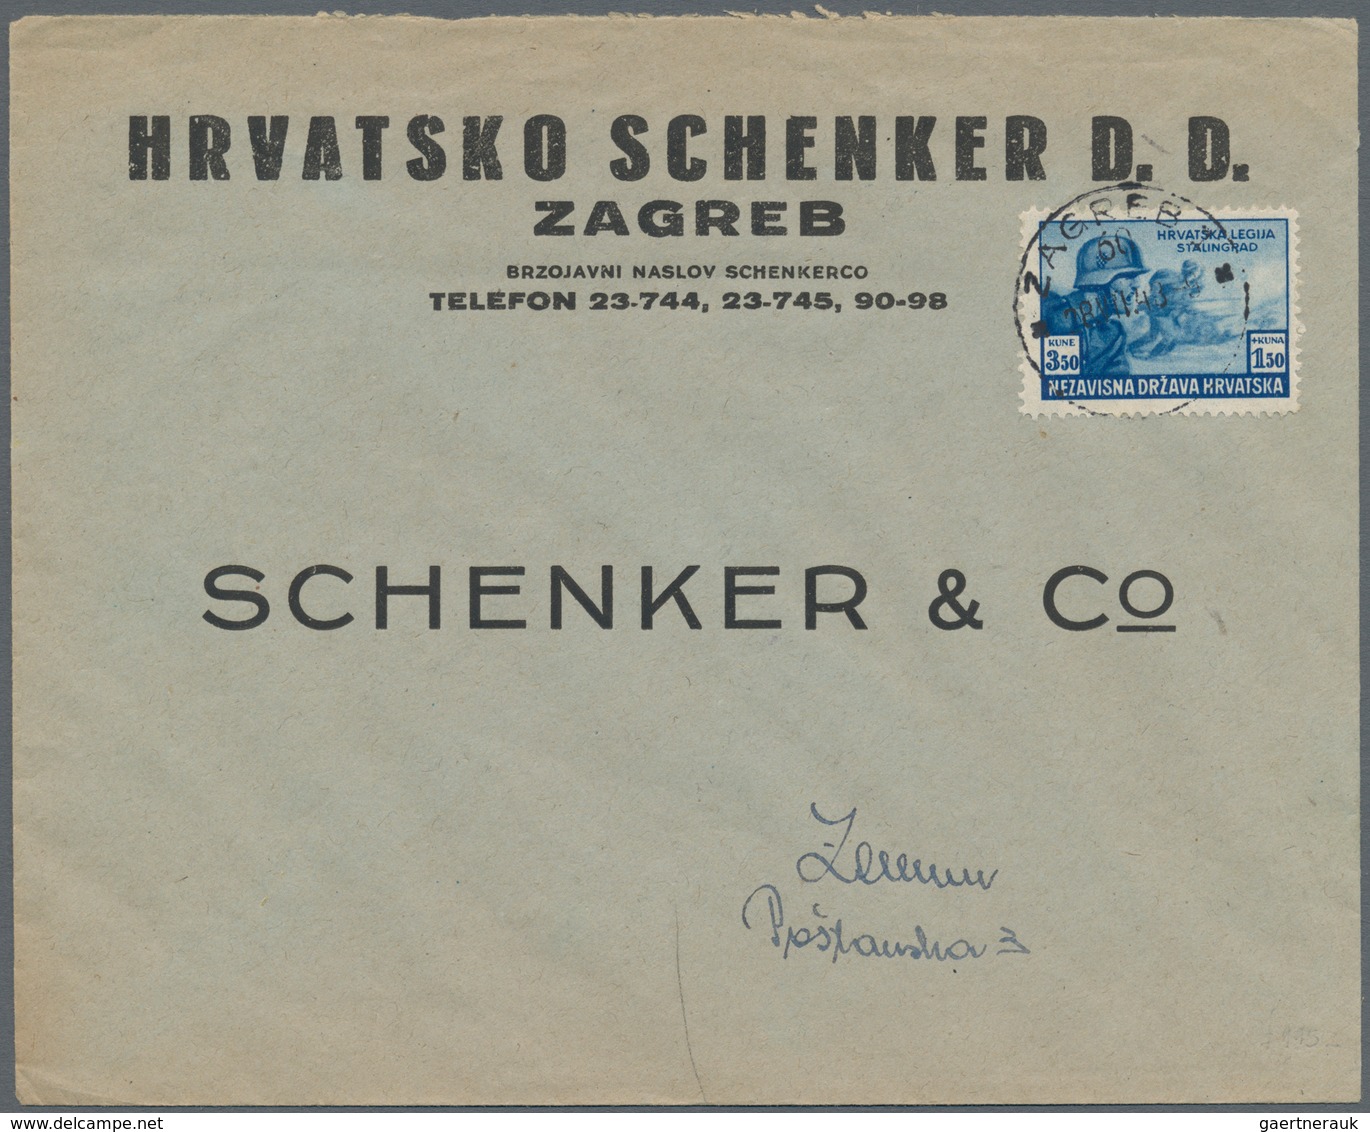 Kroatien: from 1918 interesting lot, almost only better single pieces, incl. trial prints, imperfora